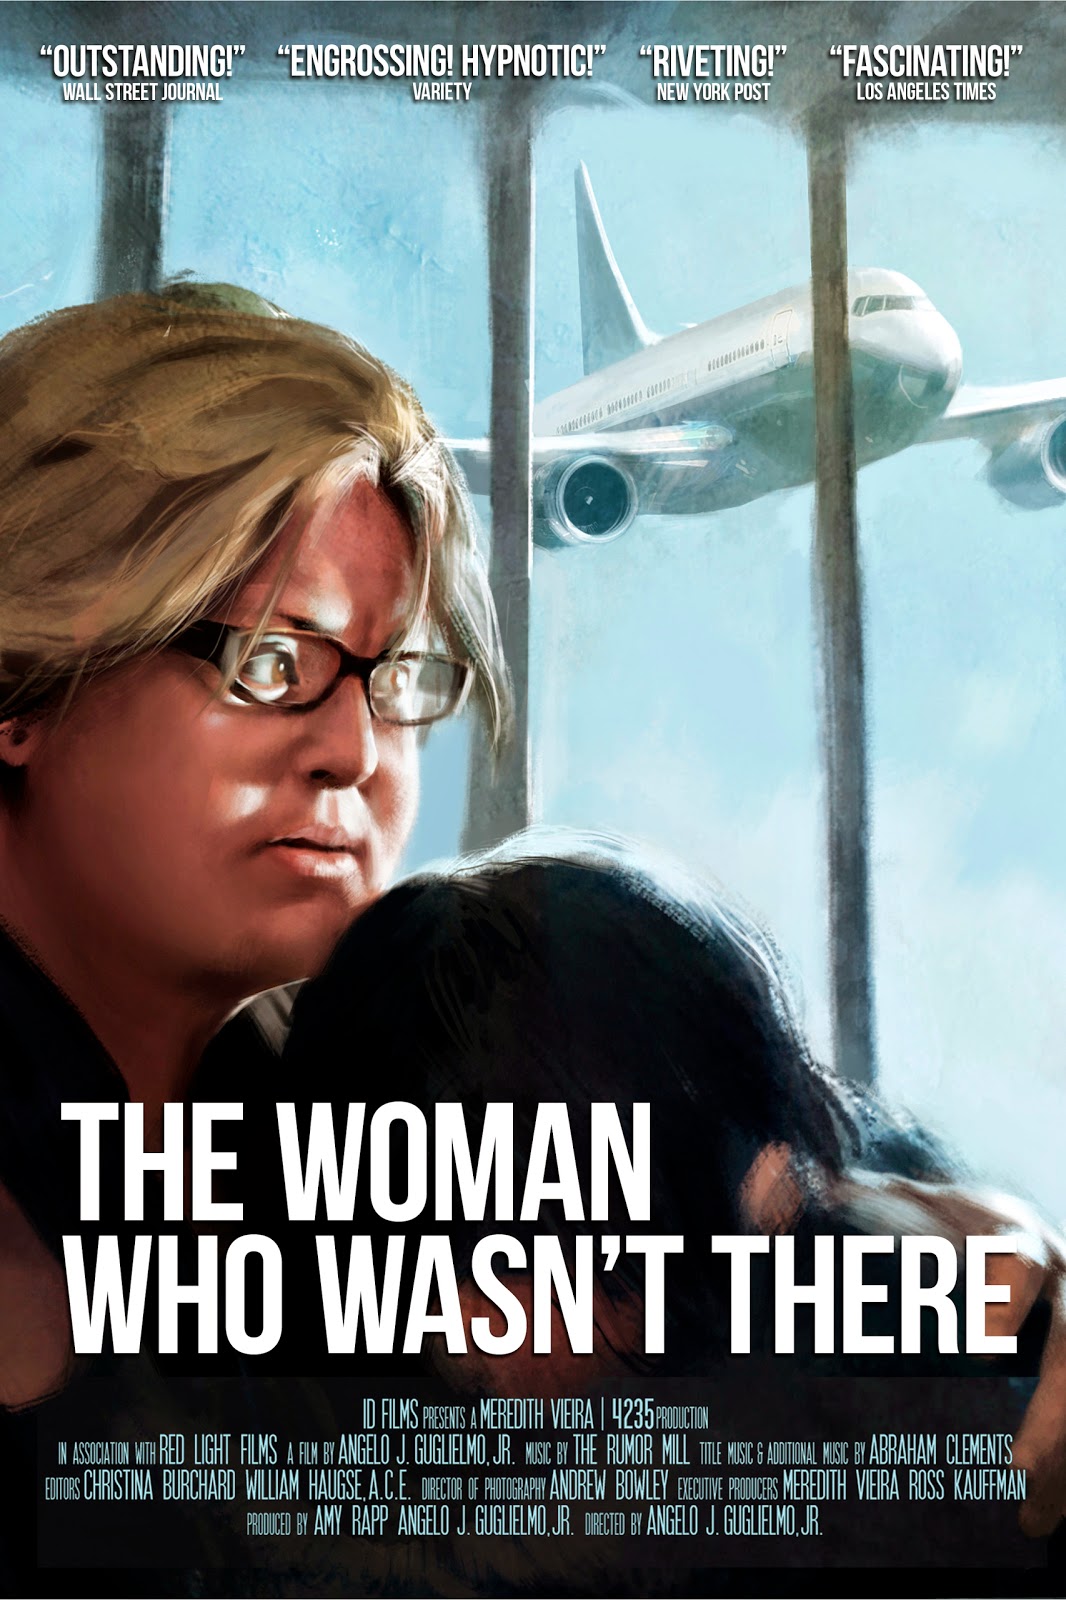 The Woman Who Wasnt There The True Story of an Incredible Deception